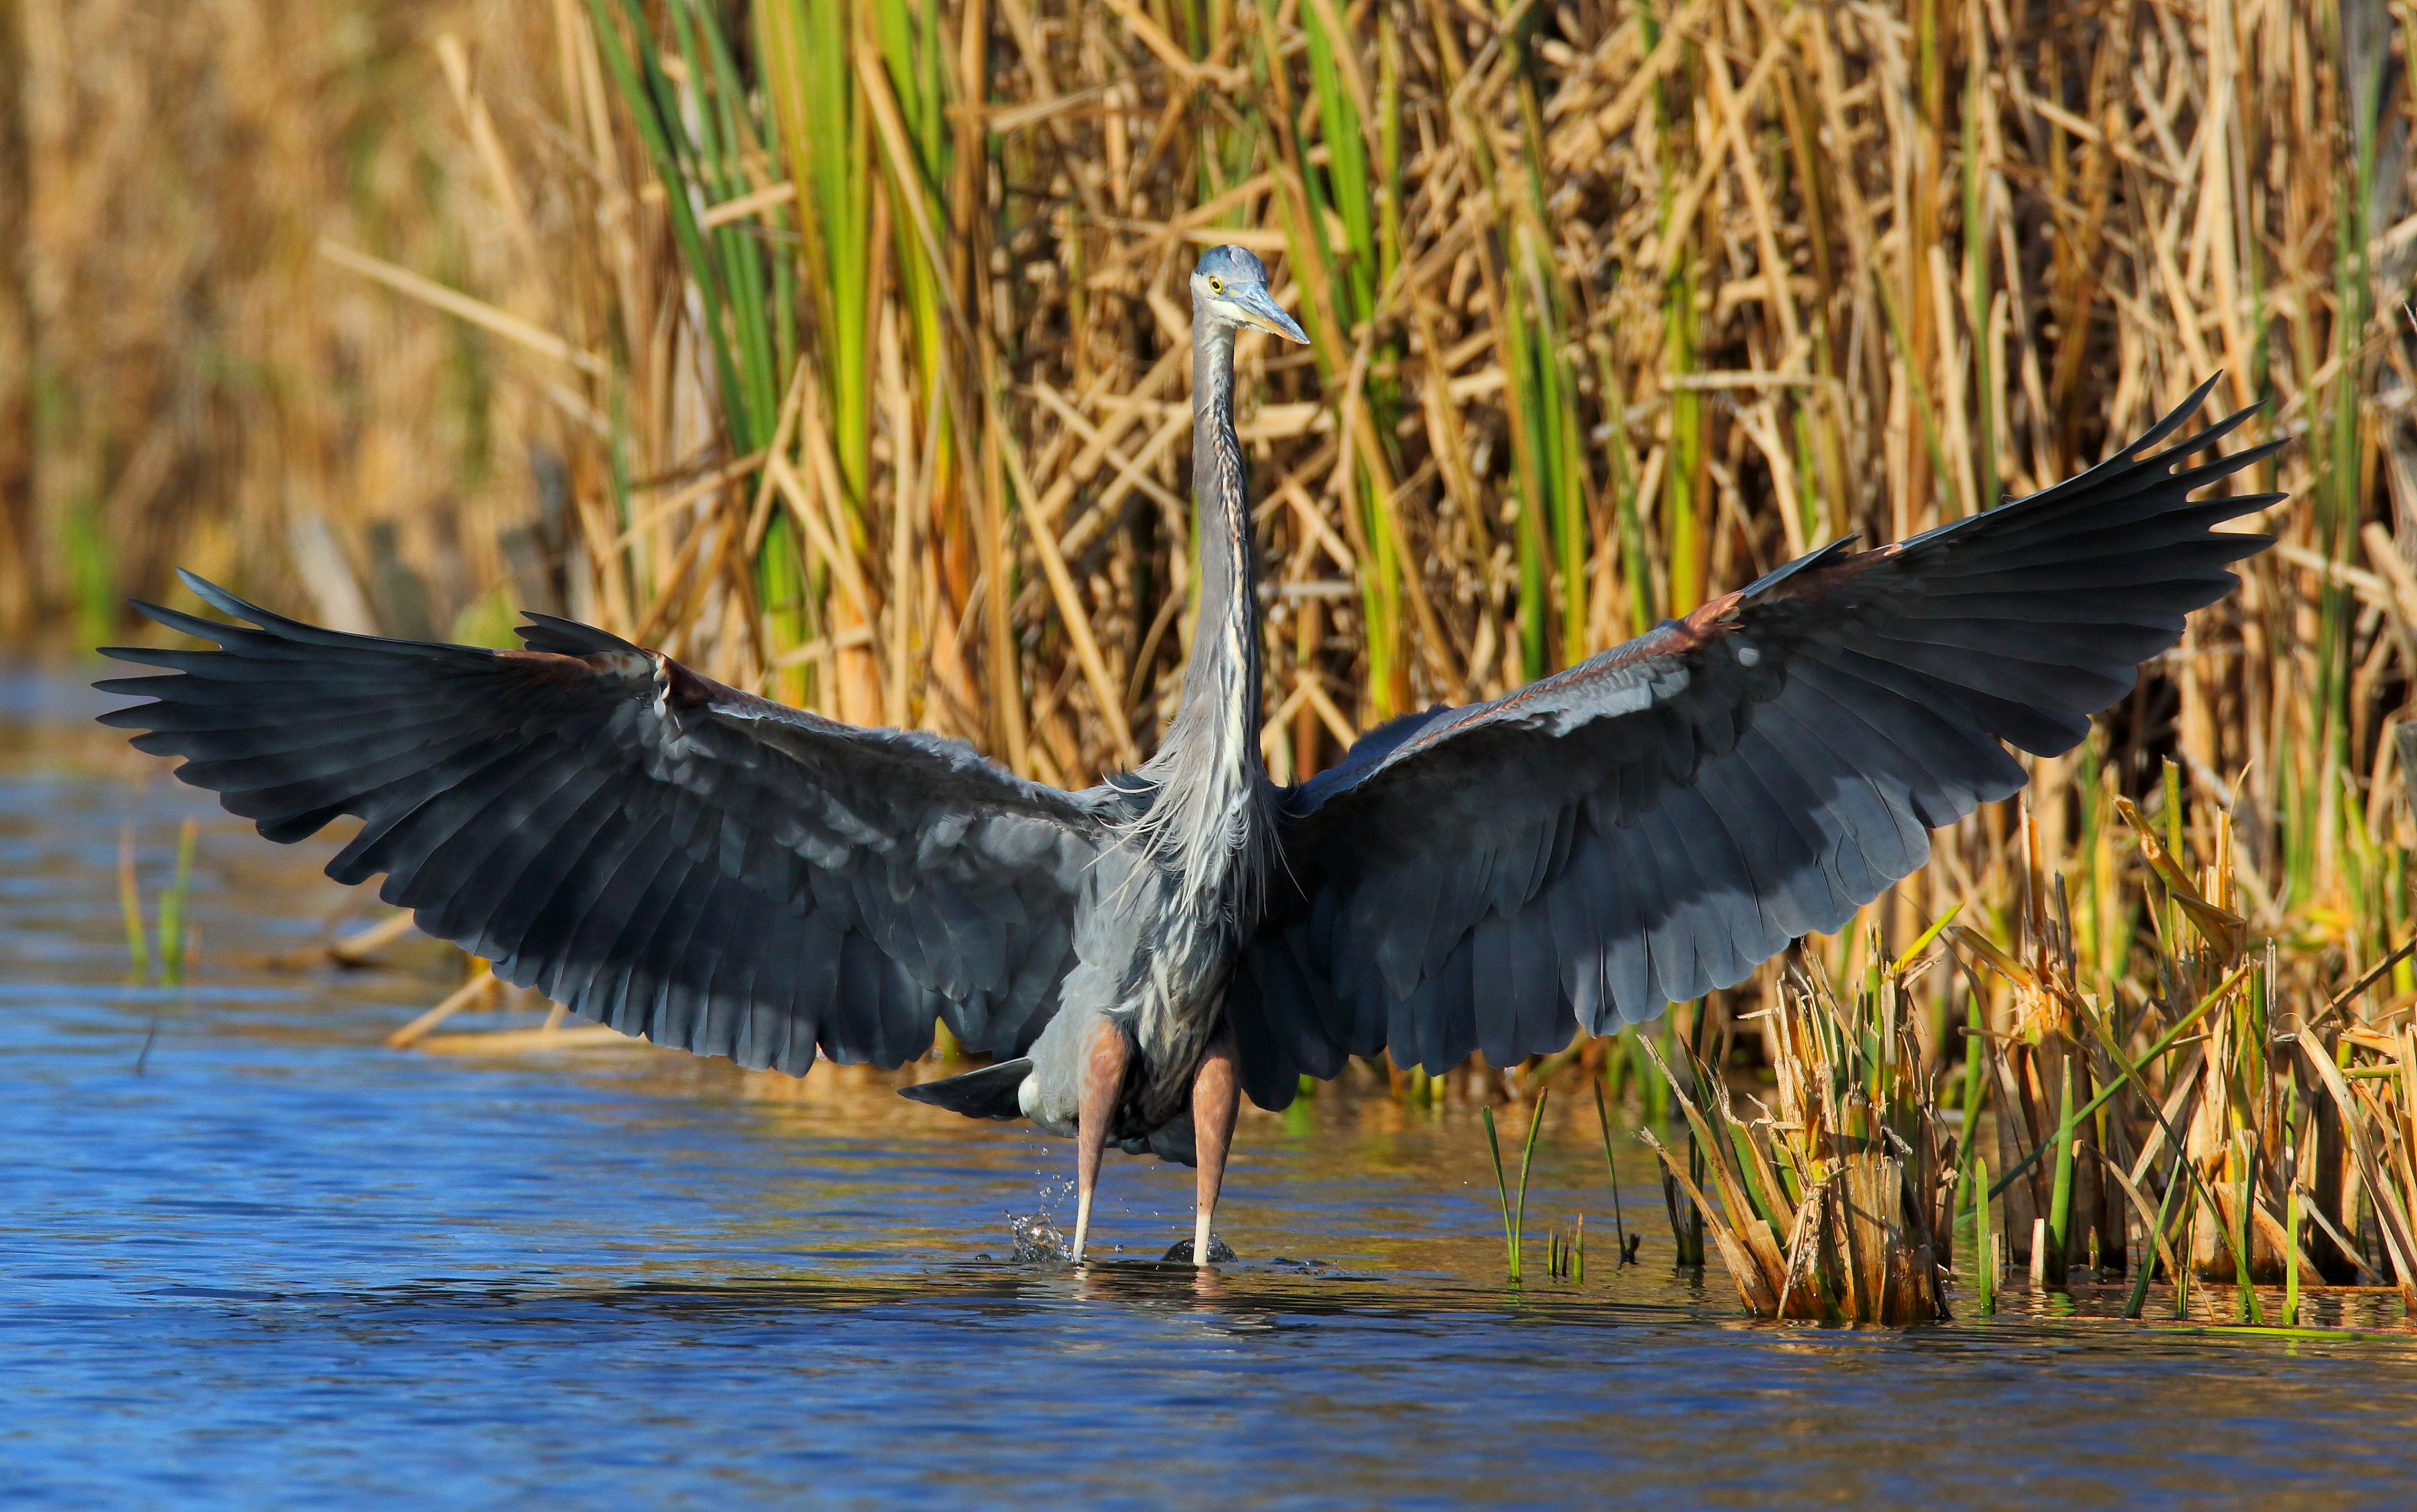 A Great Blue Heron in the Snug Harbor tidal pond. Photo: <a href=\"https://www.flickr.com/photos/120553232@N02/\" target=\"_blank\" >Isaac Grant</a>